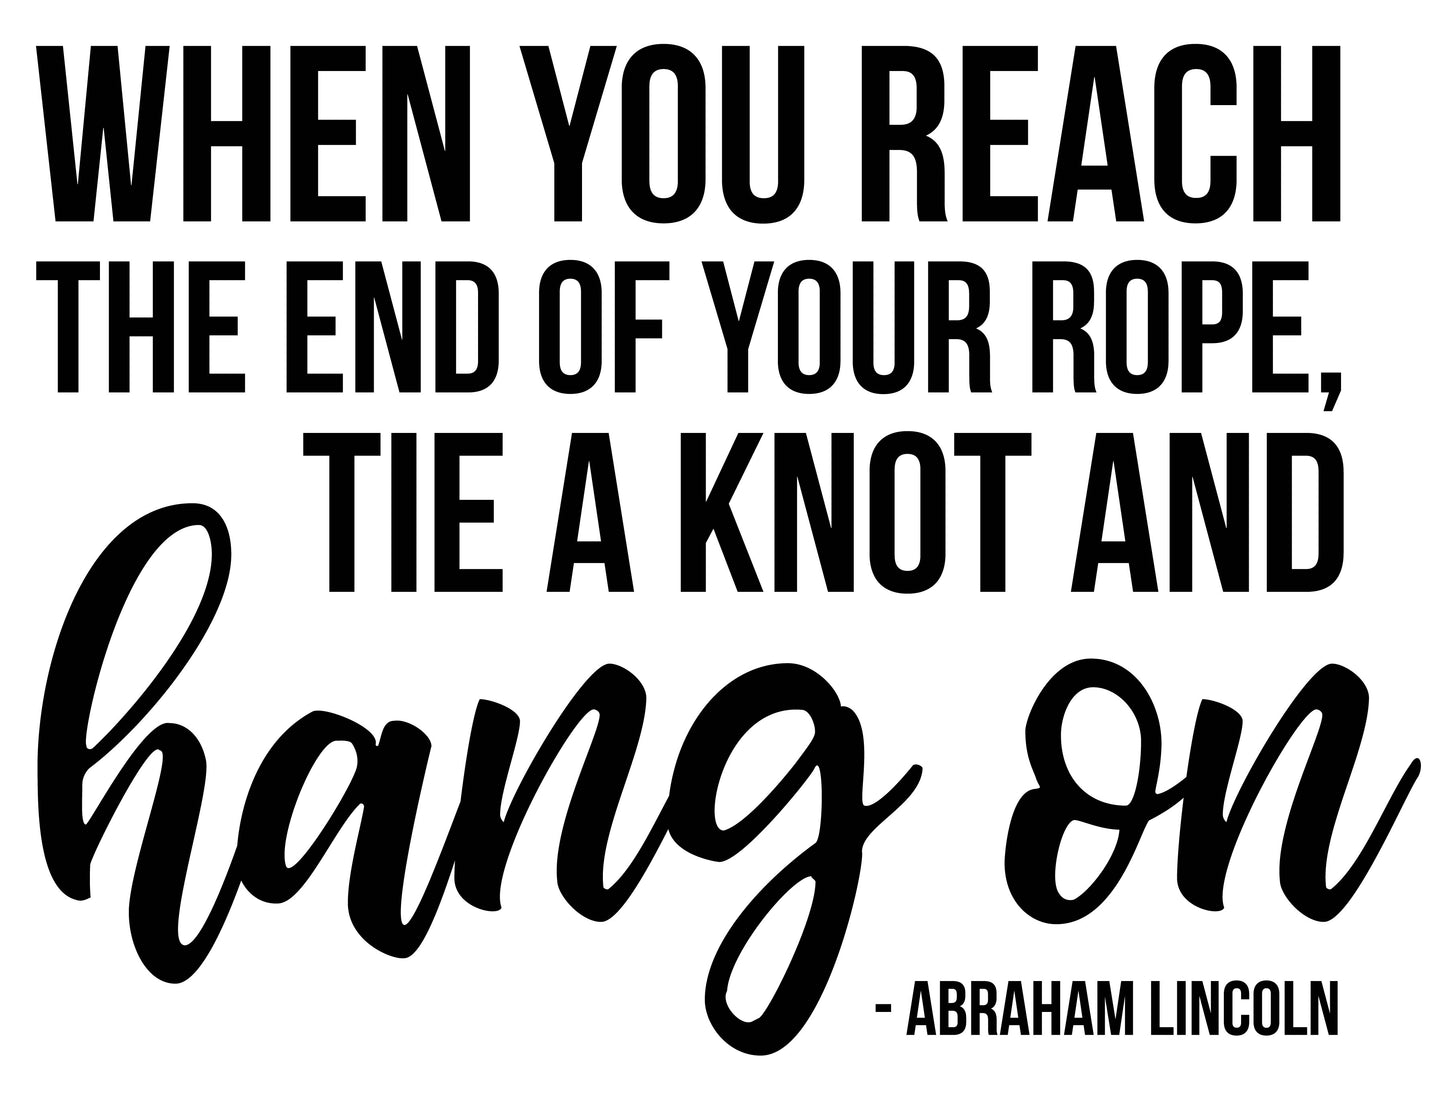 WHEN YOU REACH THE END OF YOUR ROPE, TIE A KNOT AND HANG ON - ABRAHAM LINCOLN